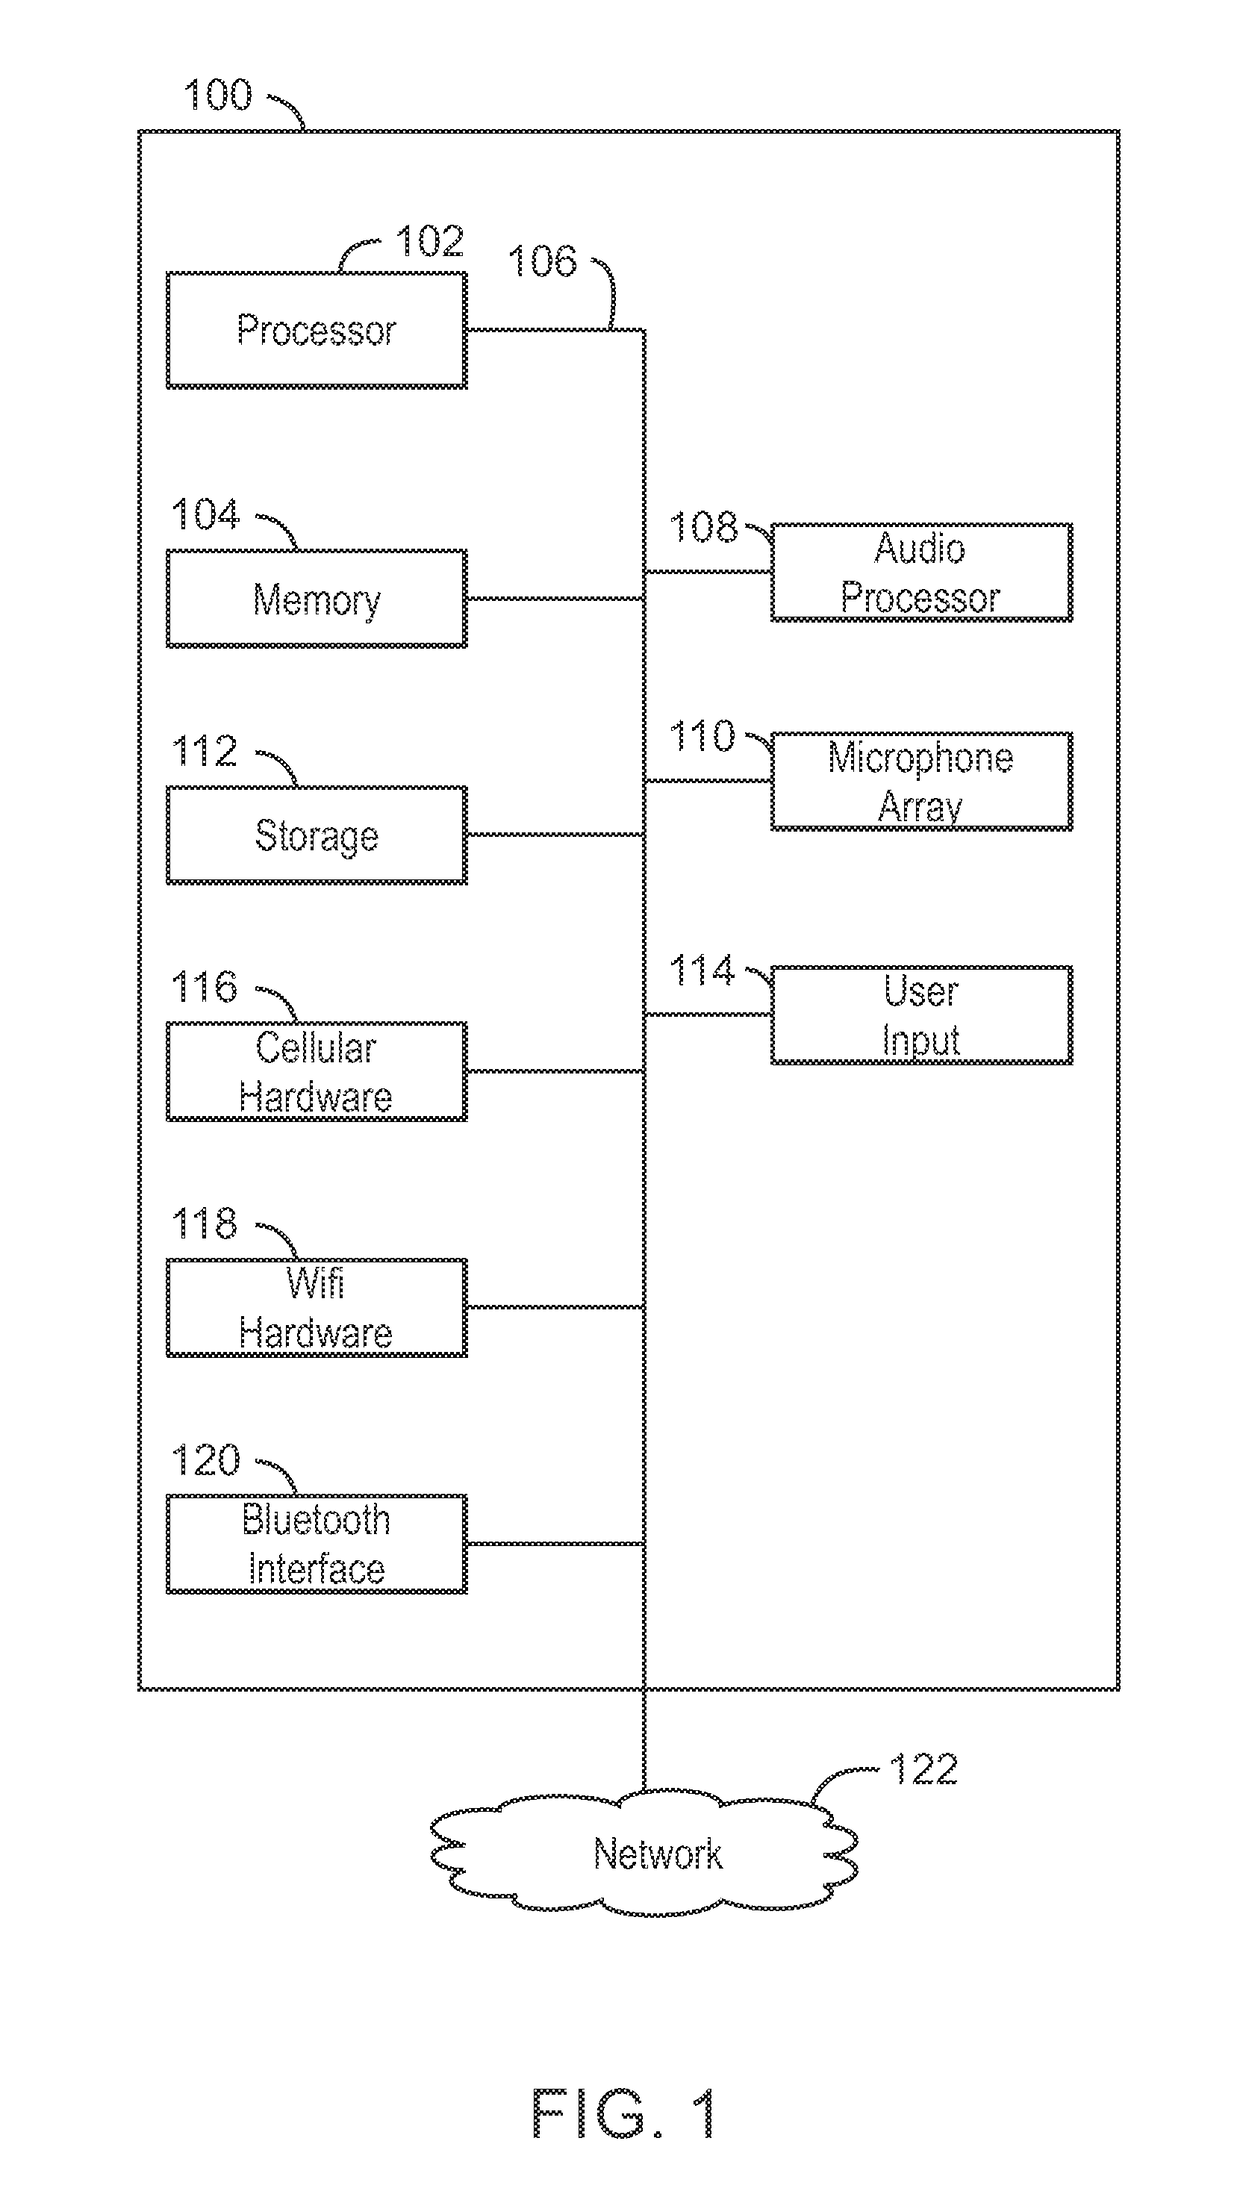 Binaural recording for processing audio signals to enable alerts